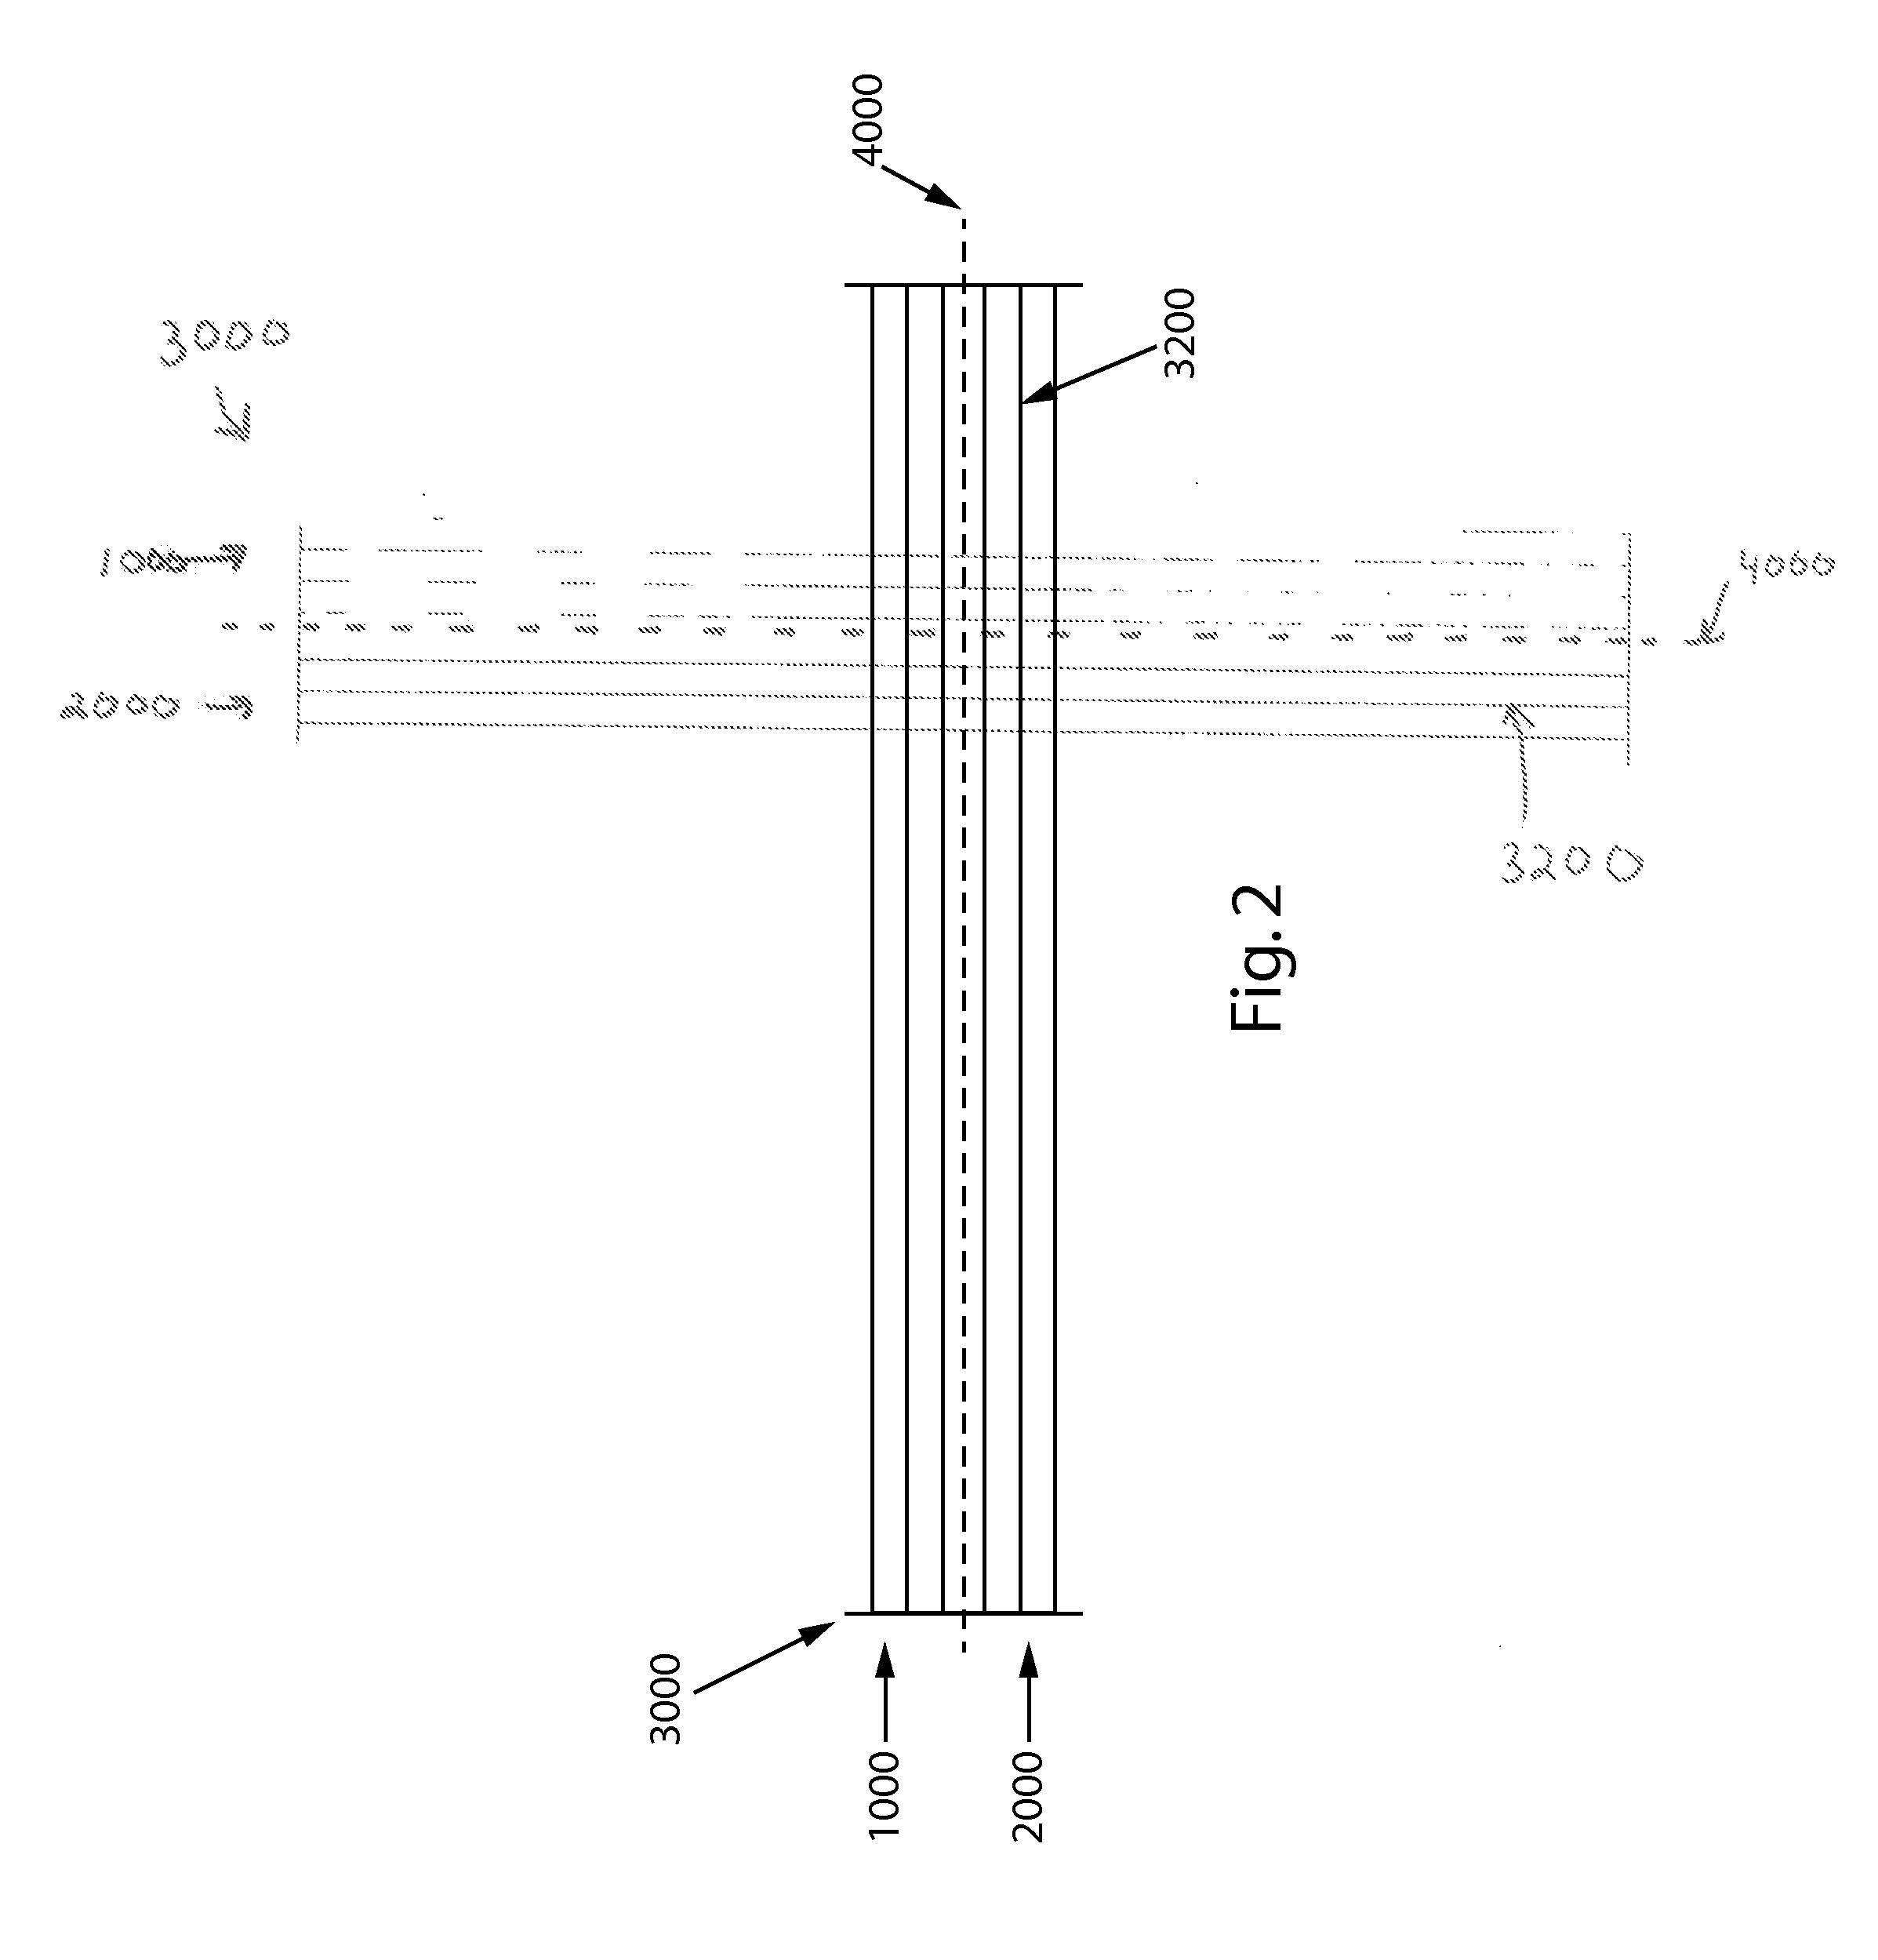 Absorbent Article With A Waistband Having Consolidation